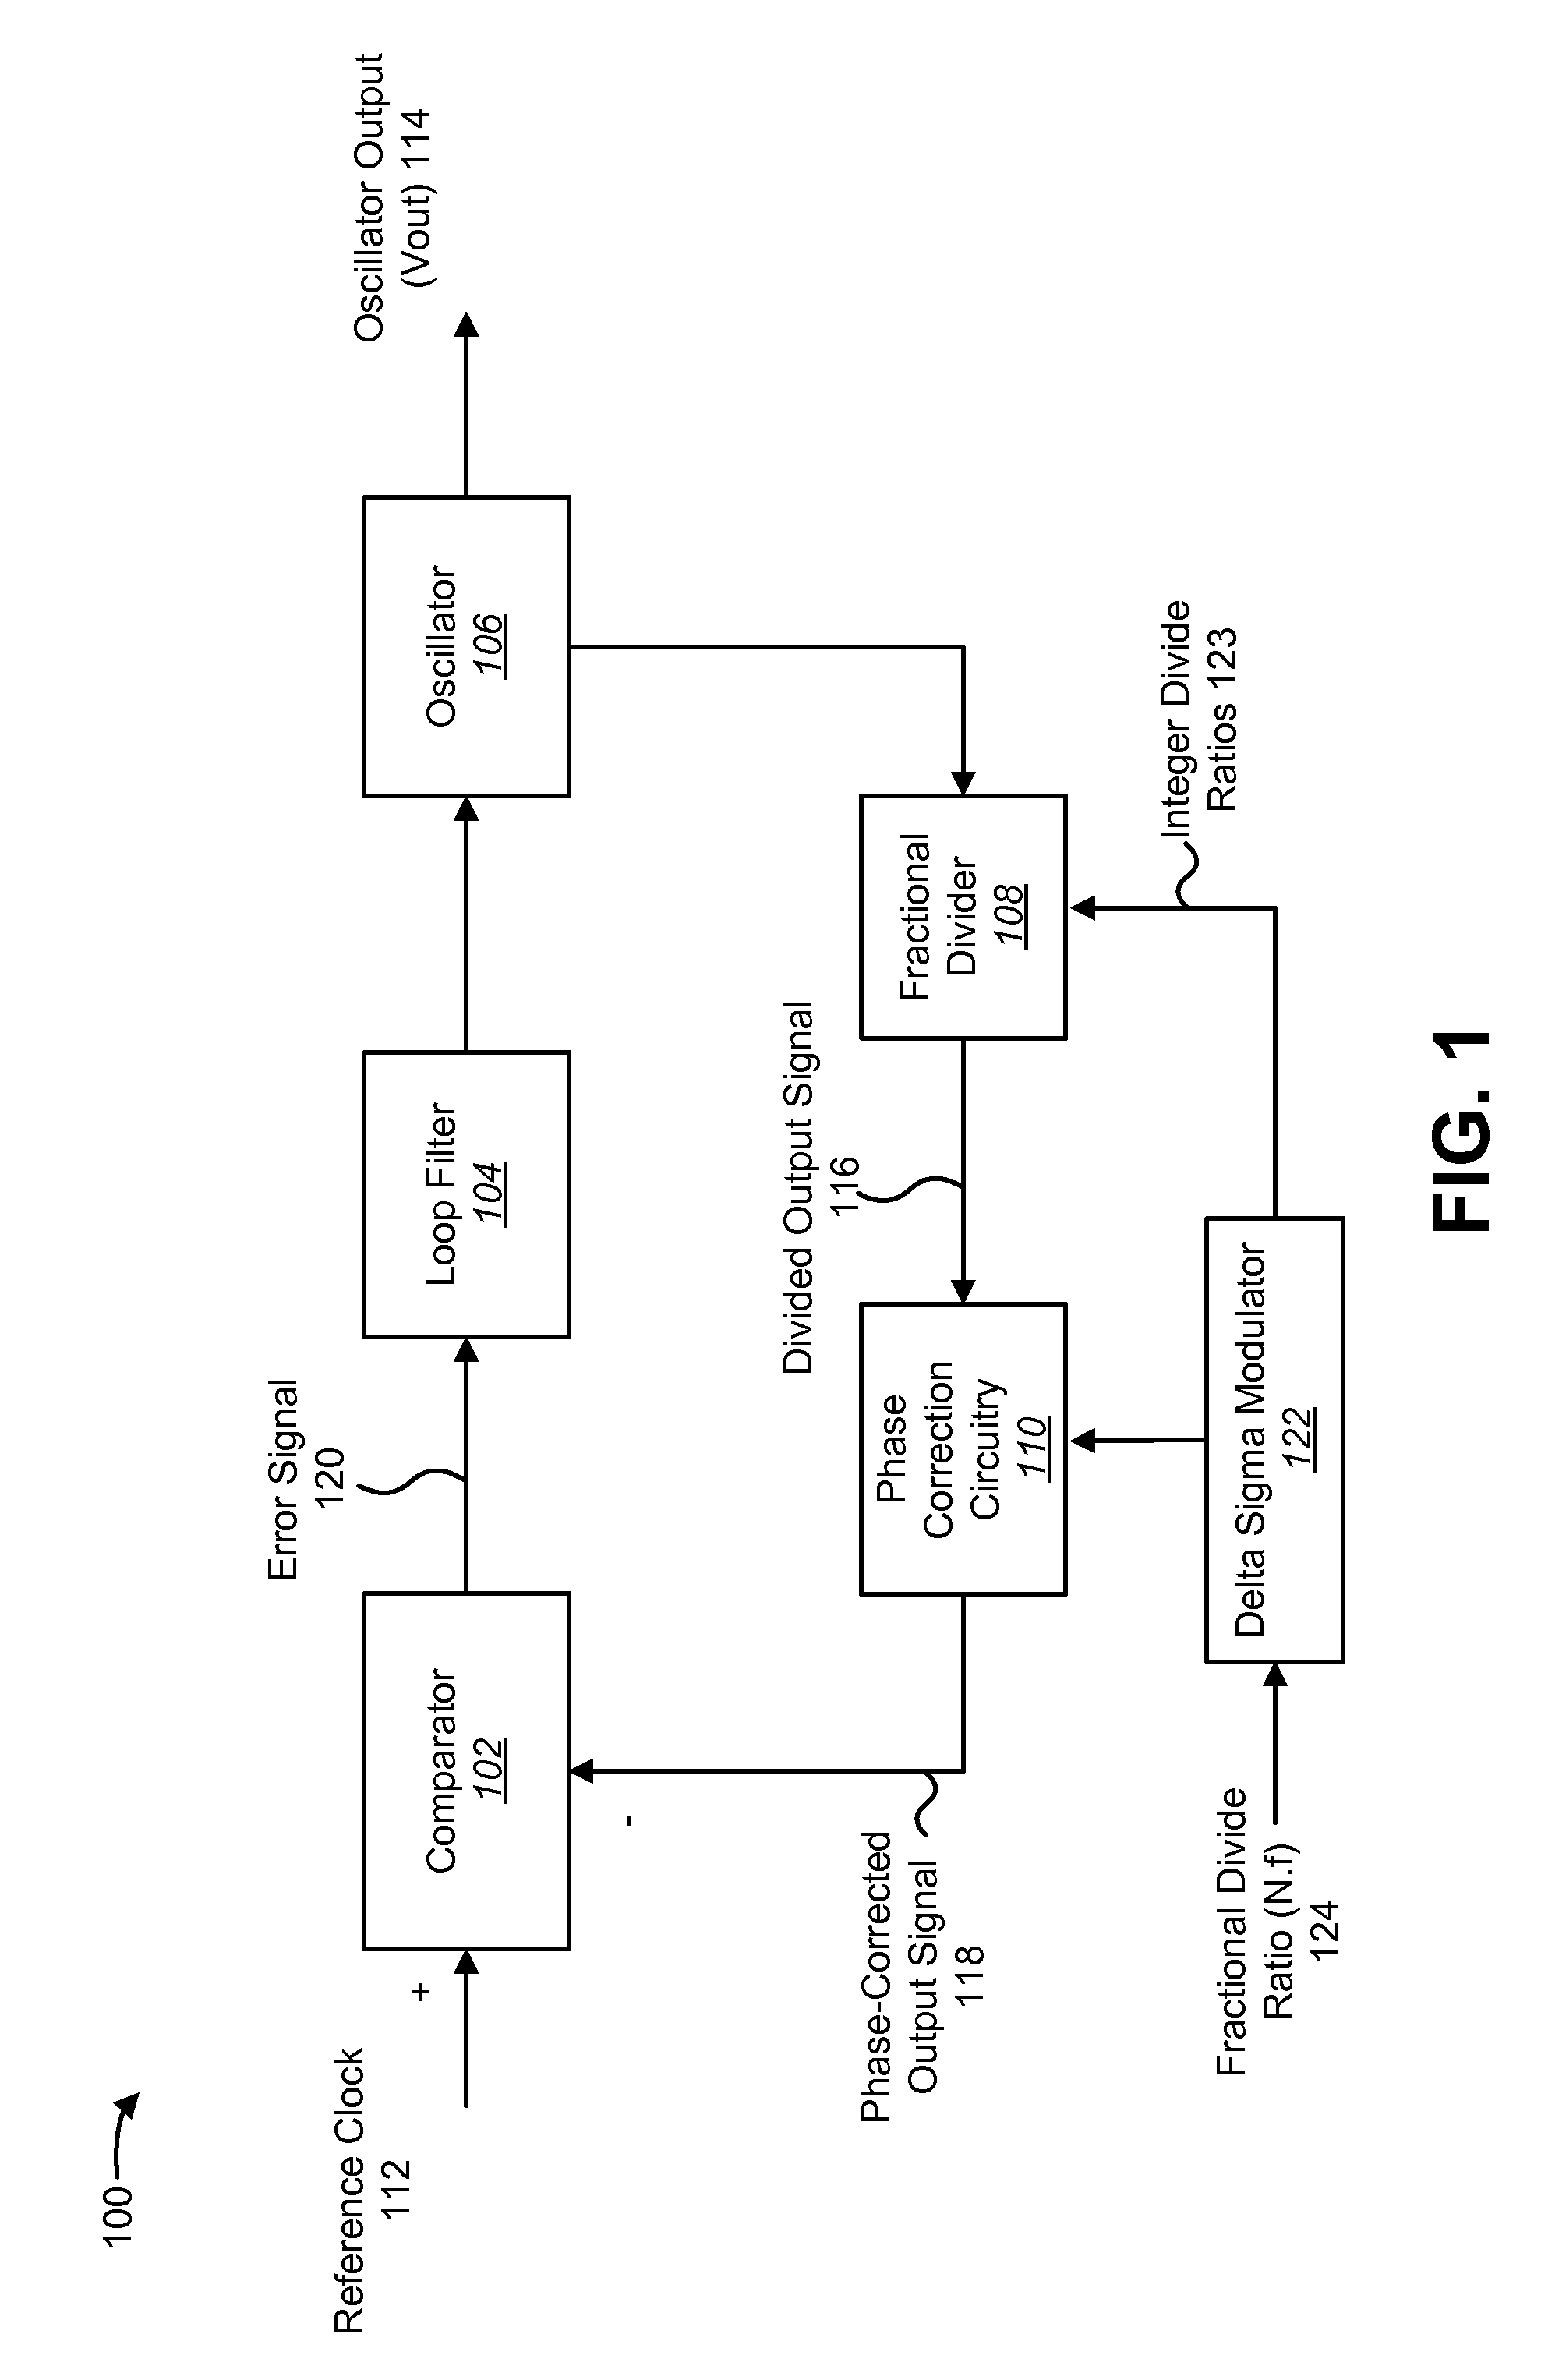 Phase locked loop with phase correction in the feedback loop